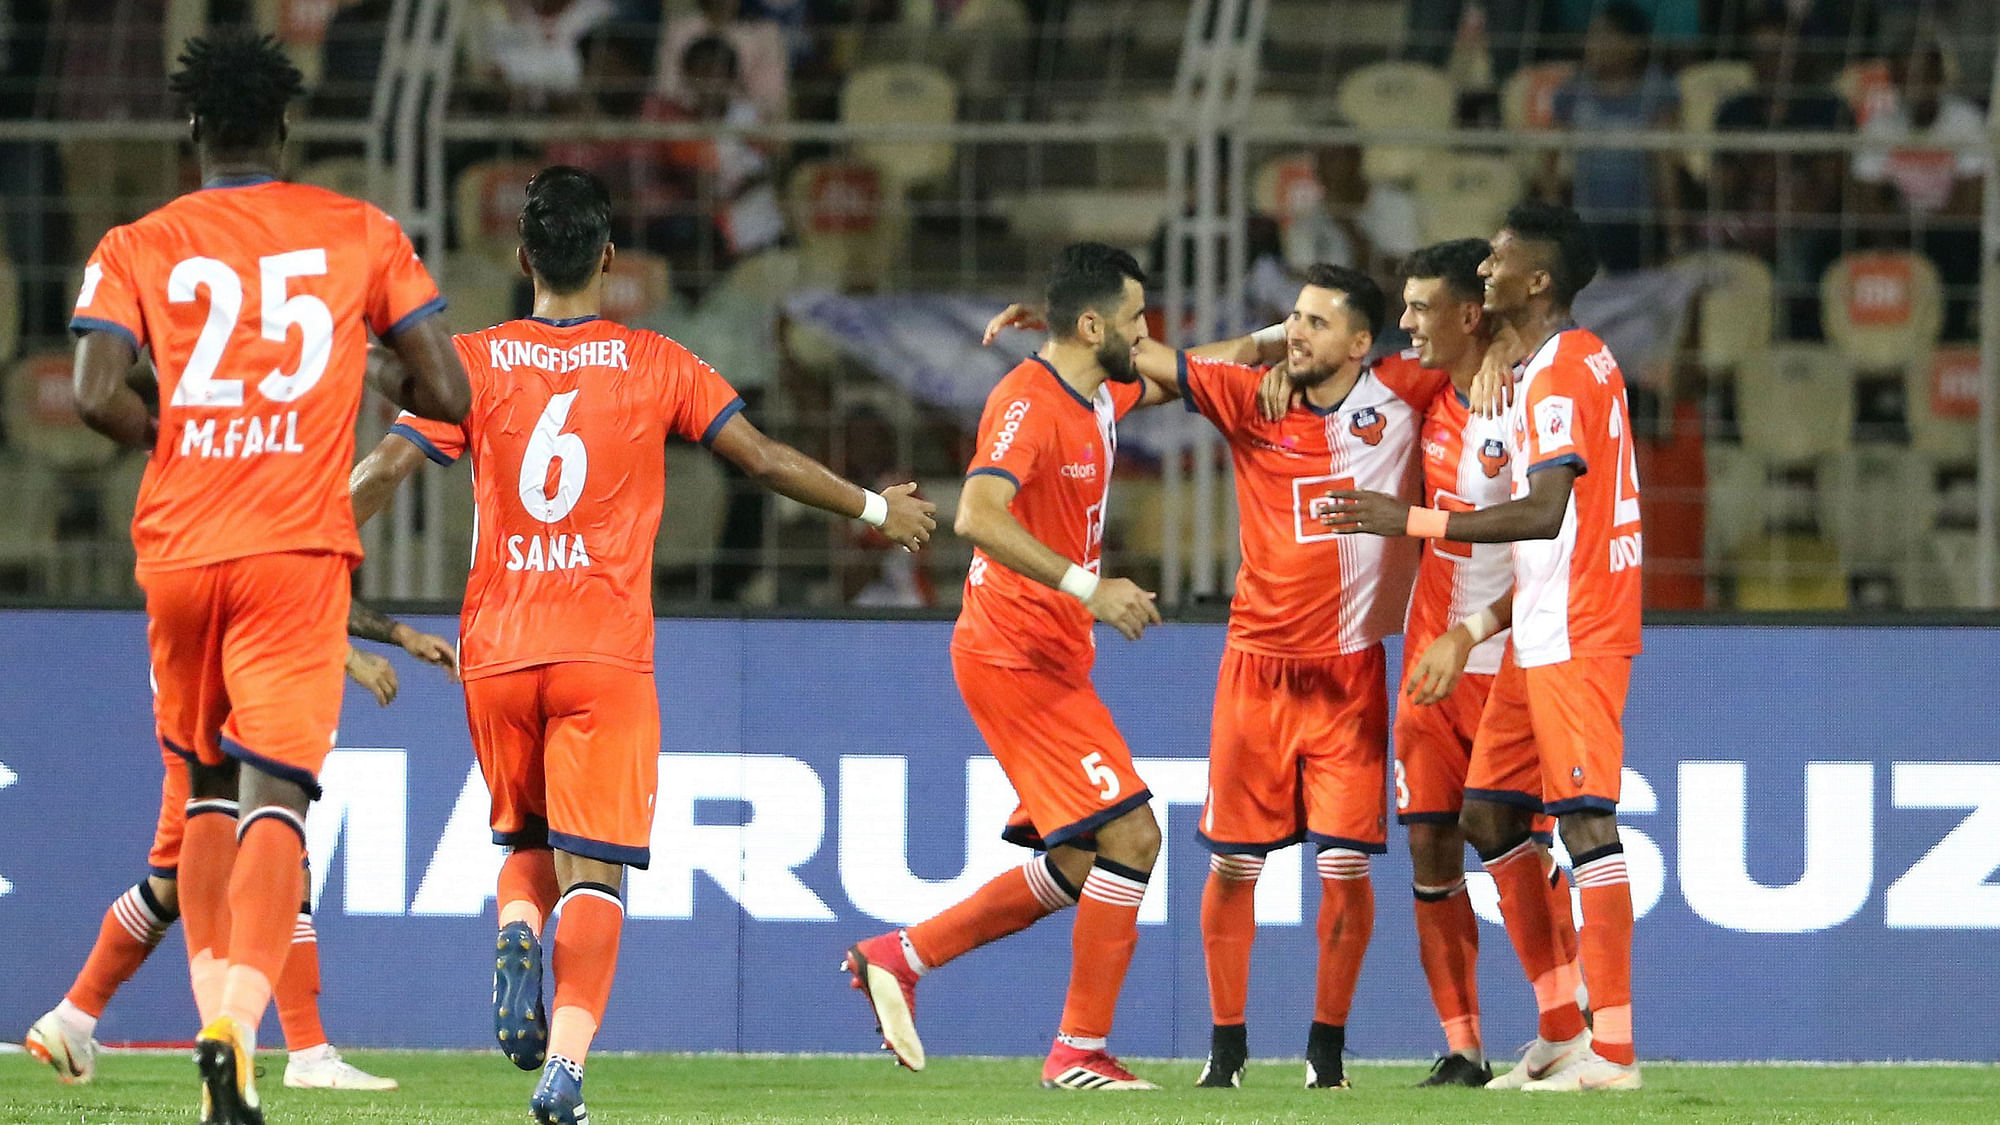 FC Goa players celebrate their glorious win with 5-0 against Mumbai City FC in Hero ISL at home ground.